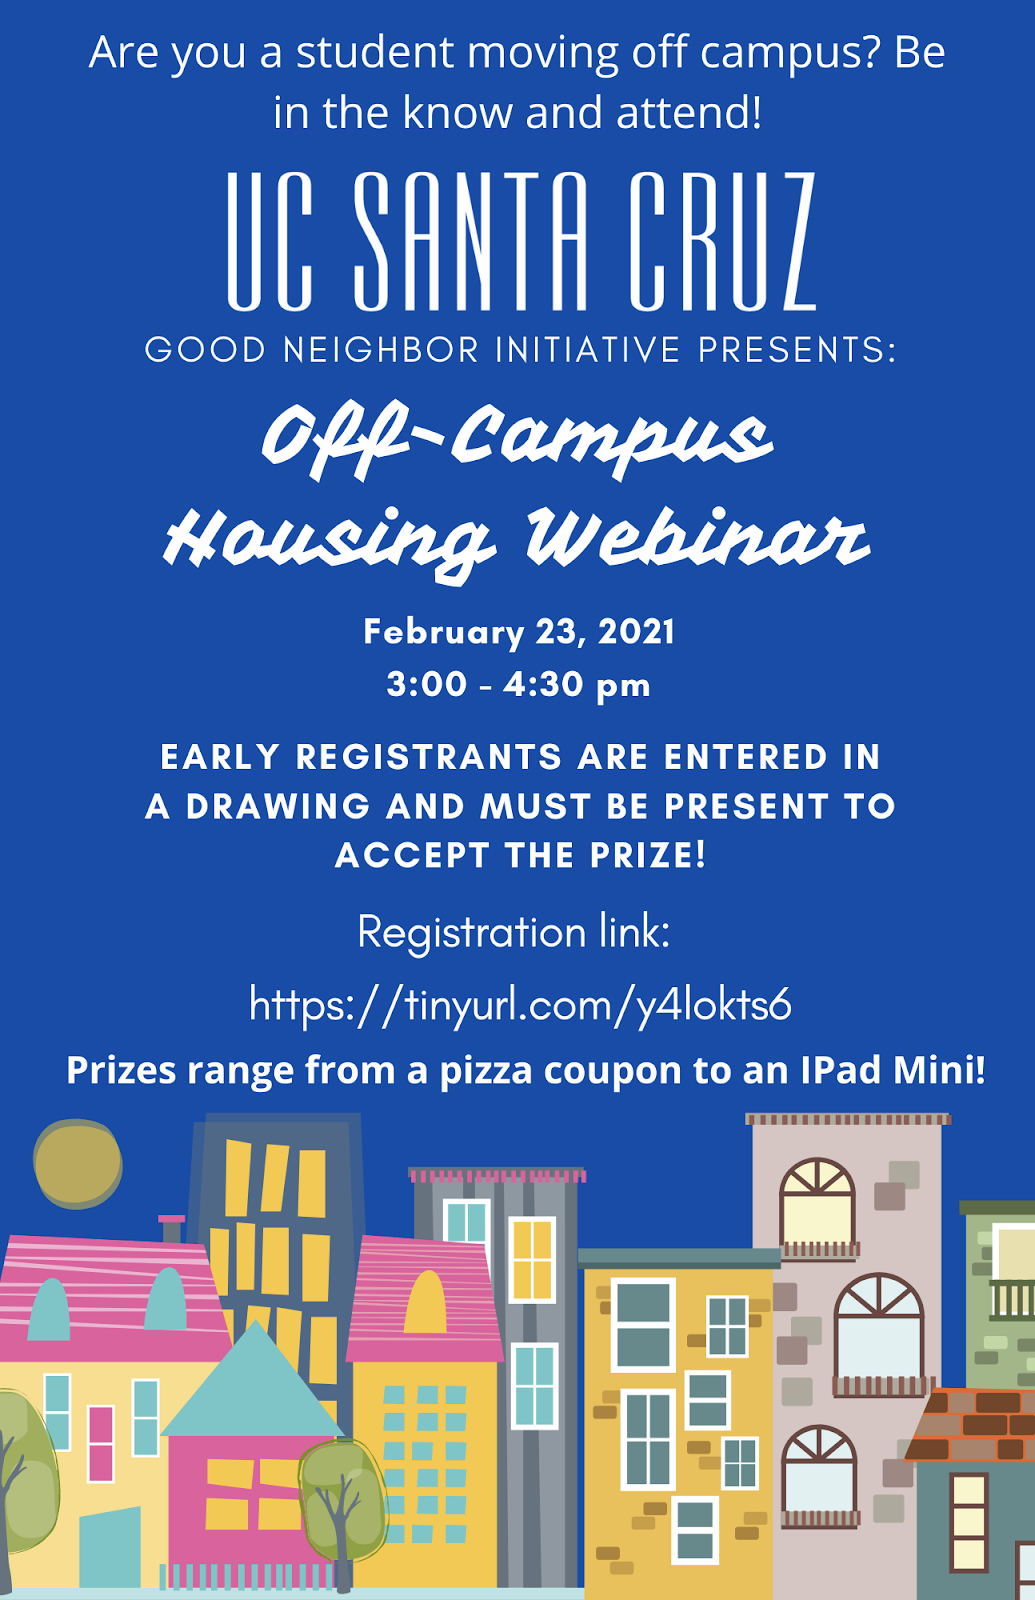 Off-campus housing webinar 2/23 at 3-4pm. early registrants are entered in a drawing and must be present to accept the prize!